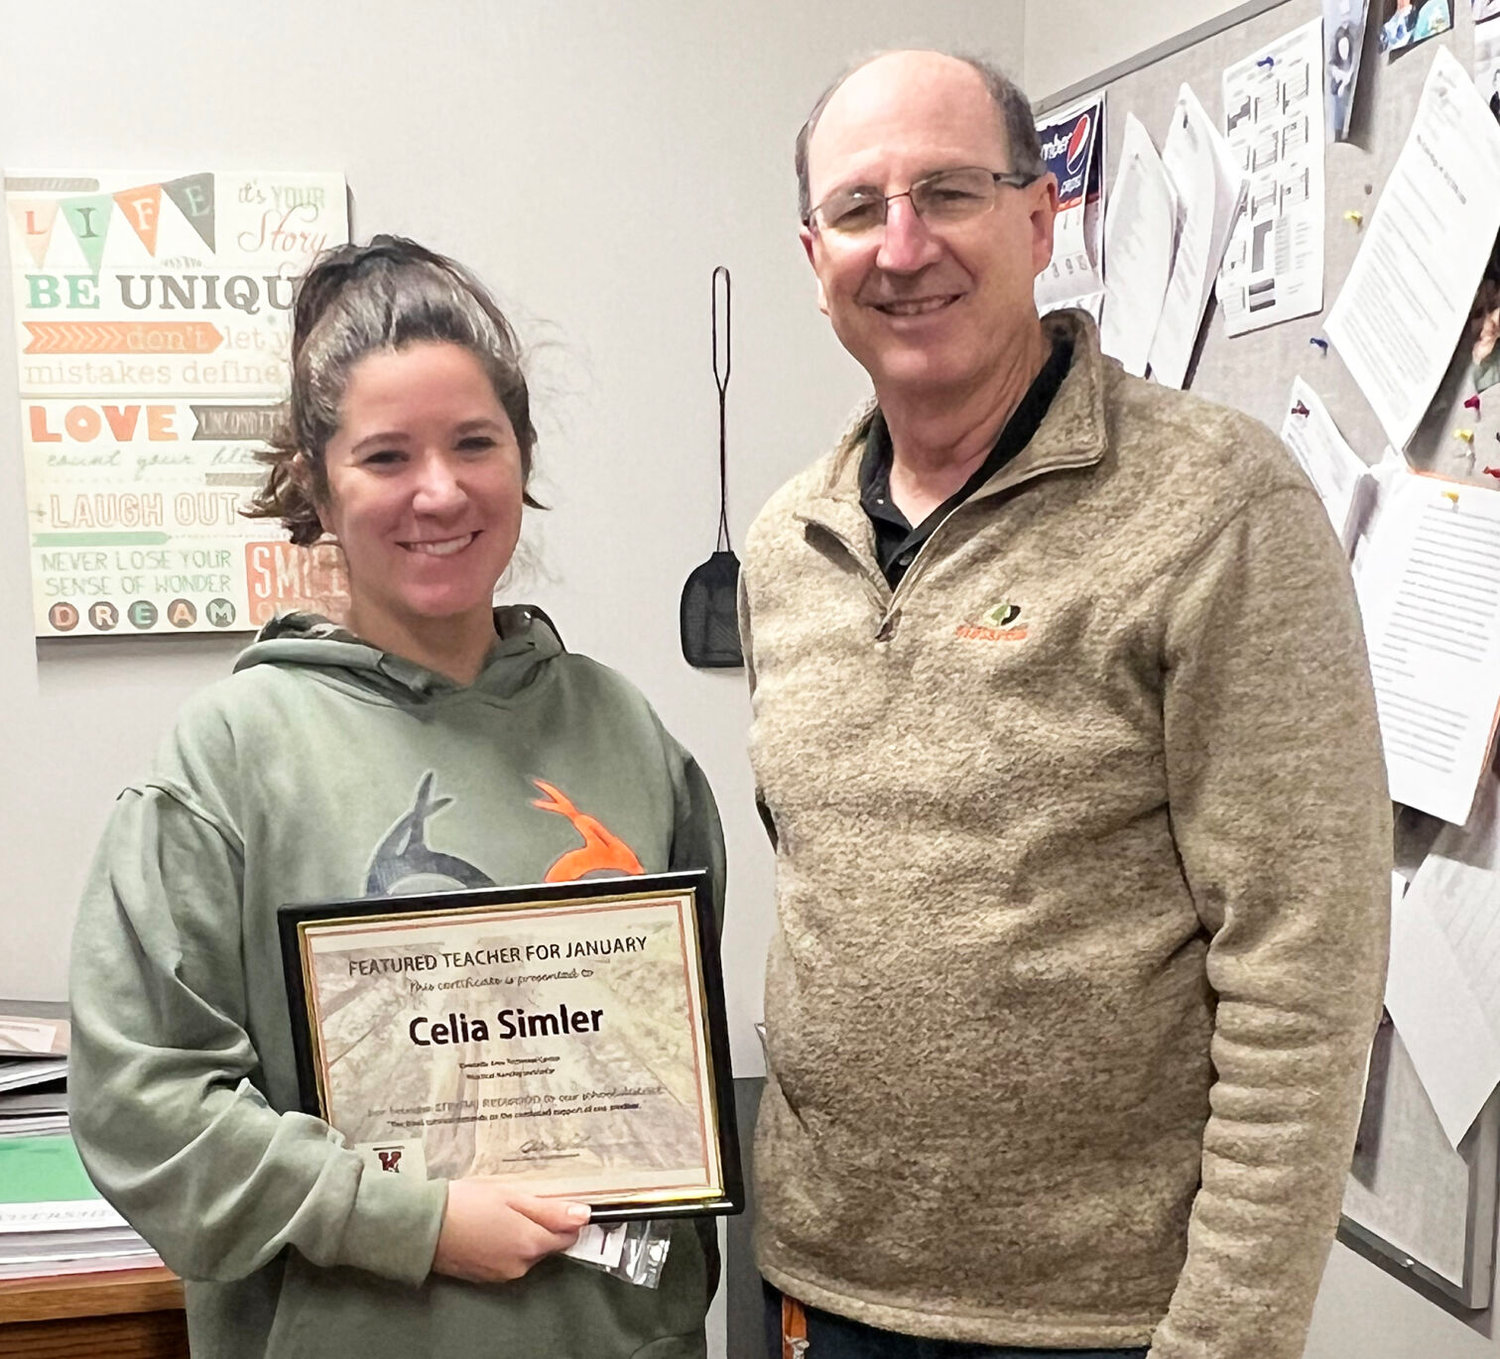 Celia Simler has worked in the field of Adult Practical Nursing for six years at the Kirksville Area Technical Center. "Teaching is a passion and seeing a light bulb light up is the best feeling in the world." she said. 